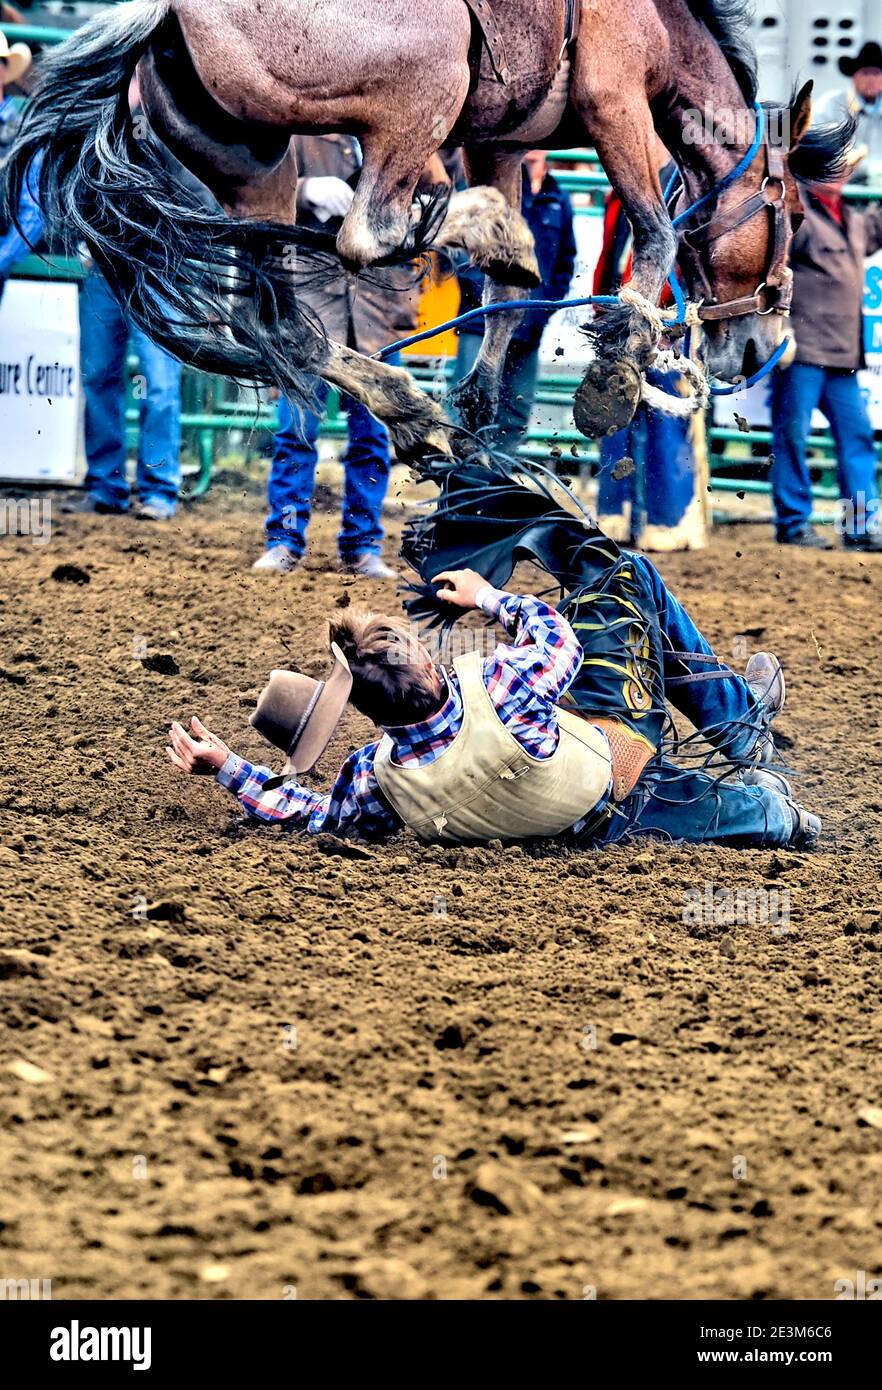 A bareback horse rider is bucked off and on the ground as his horse jumps over him at an Alberta rodeo event Stock Photo